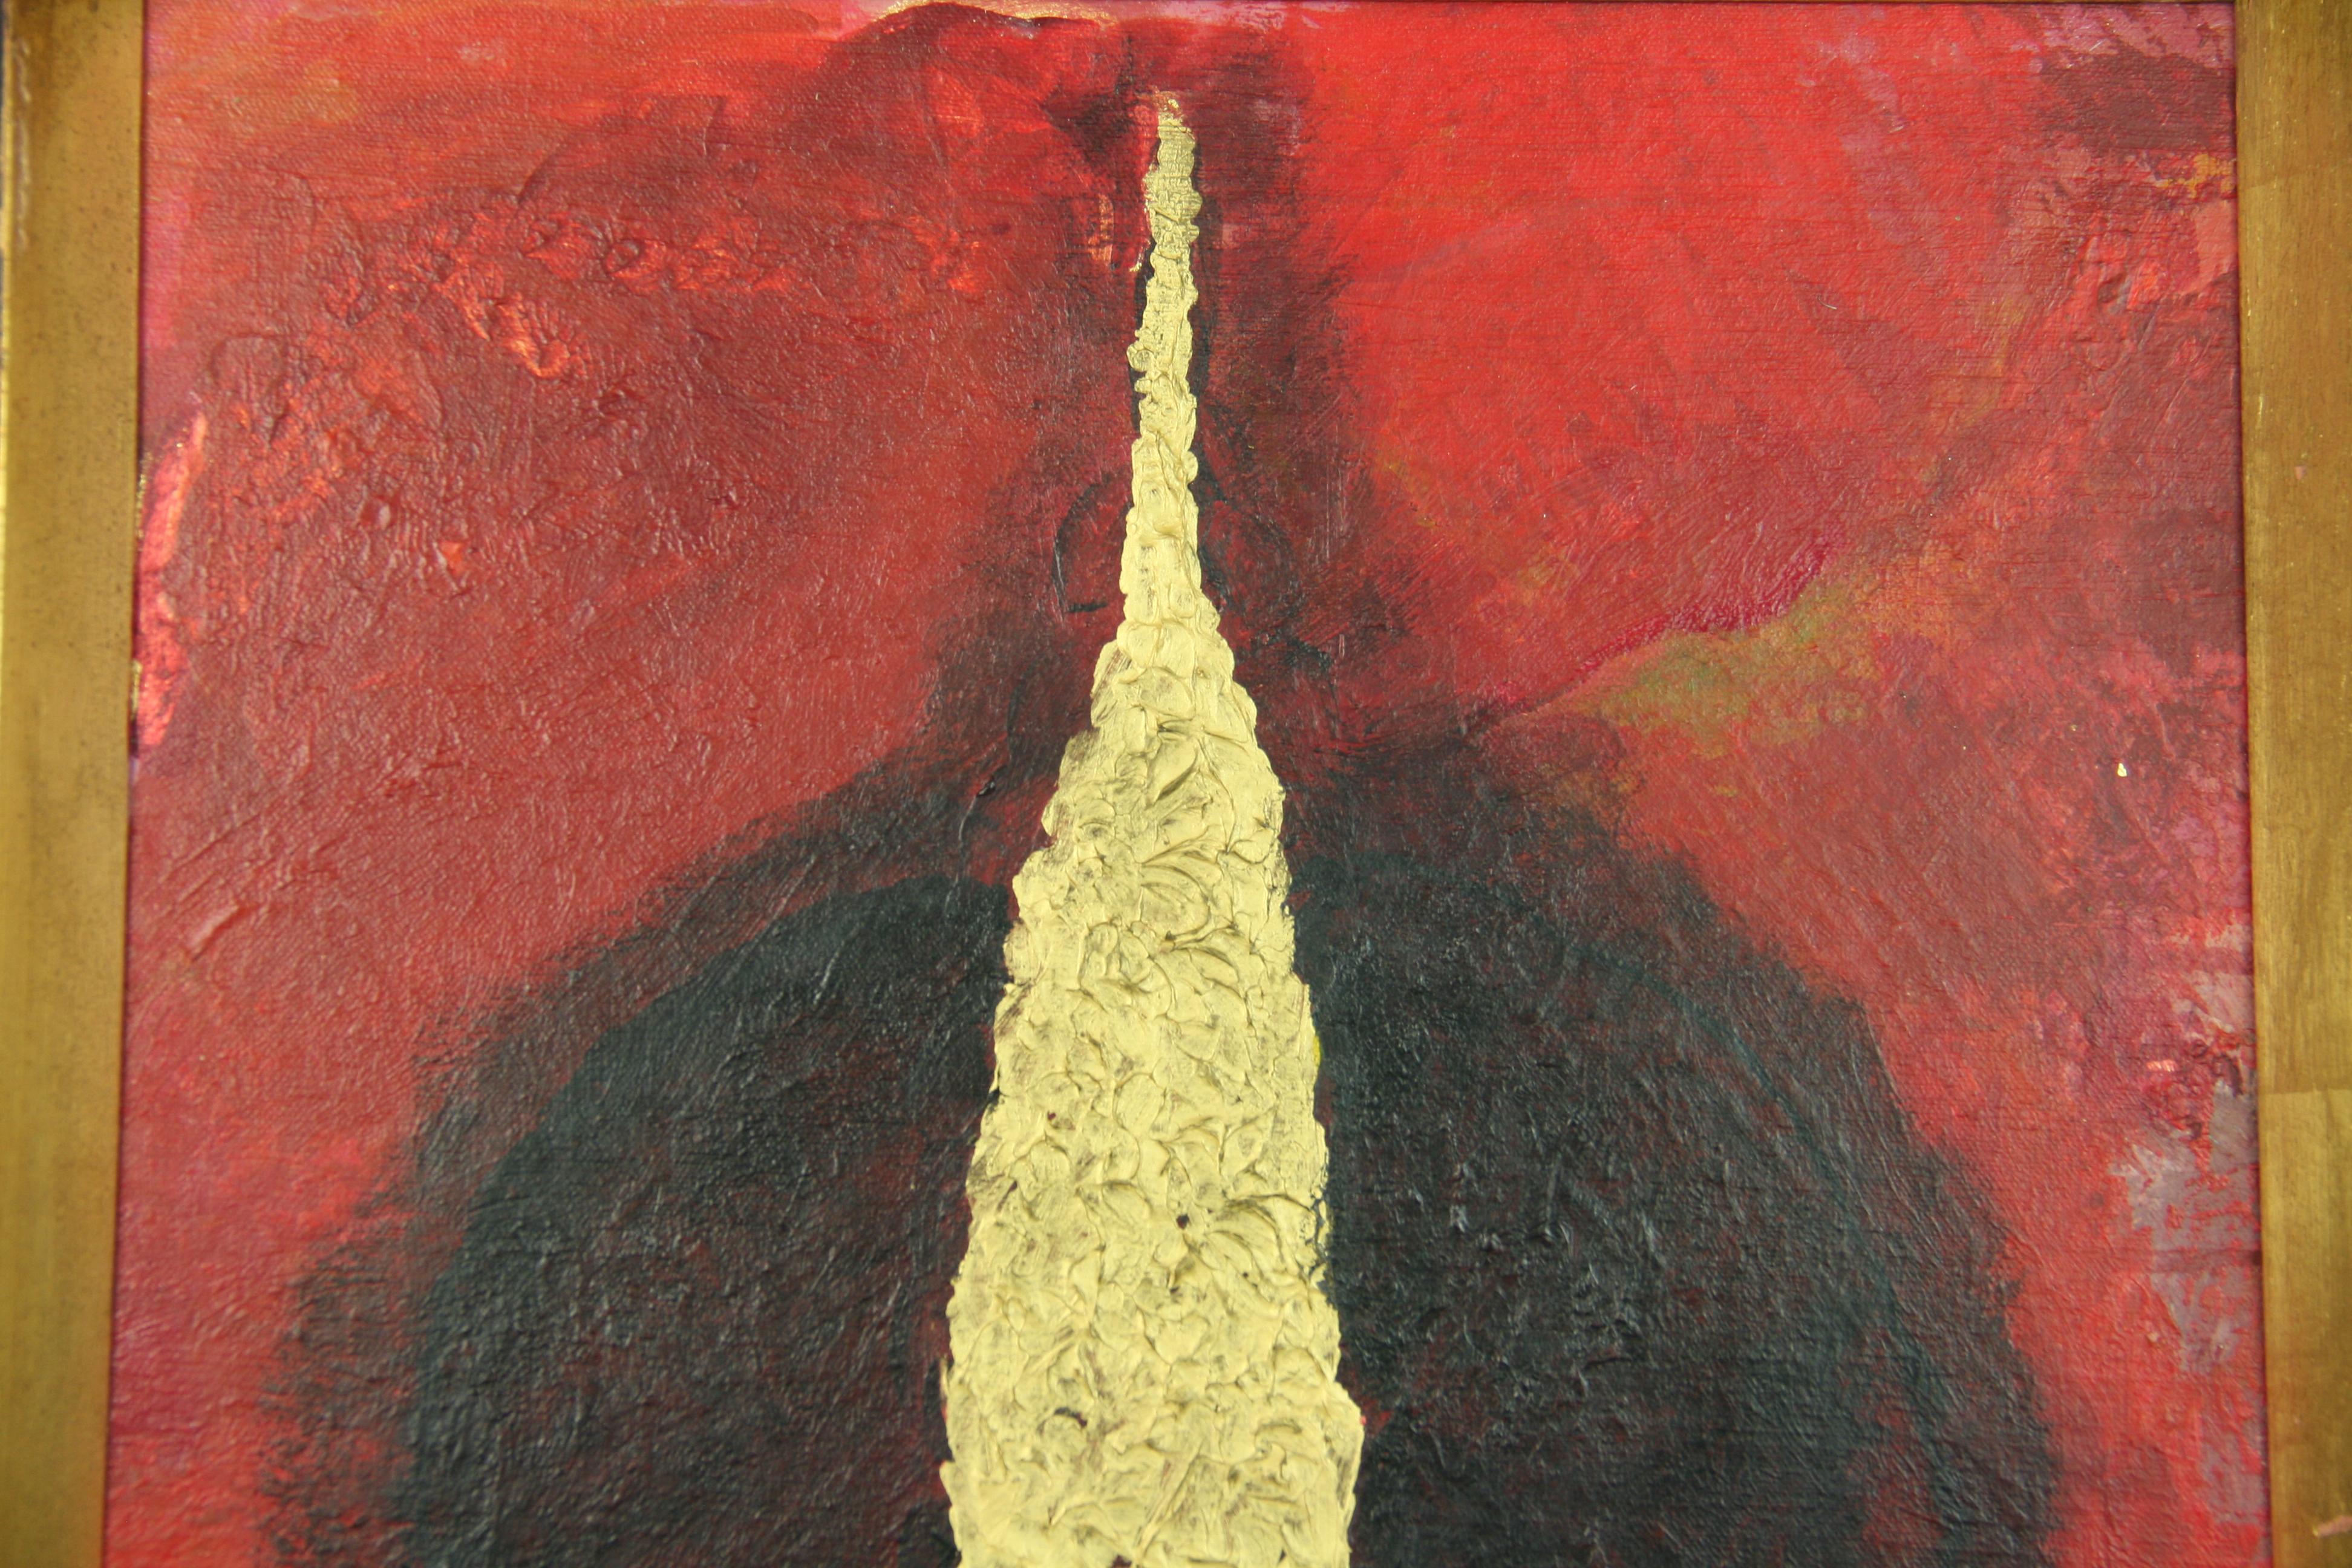   Red Gold Rising Sun  Abstract Painting 1960 For Sale 2